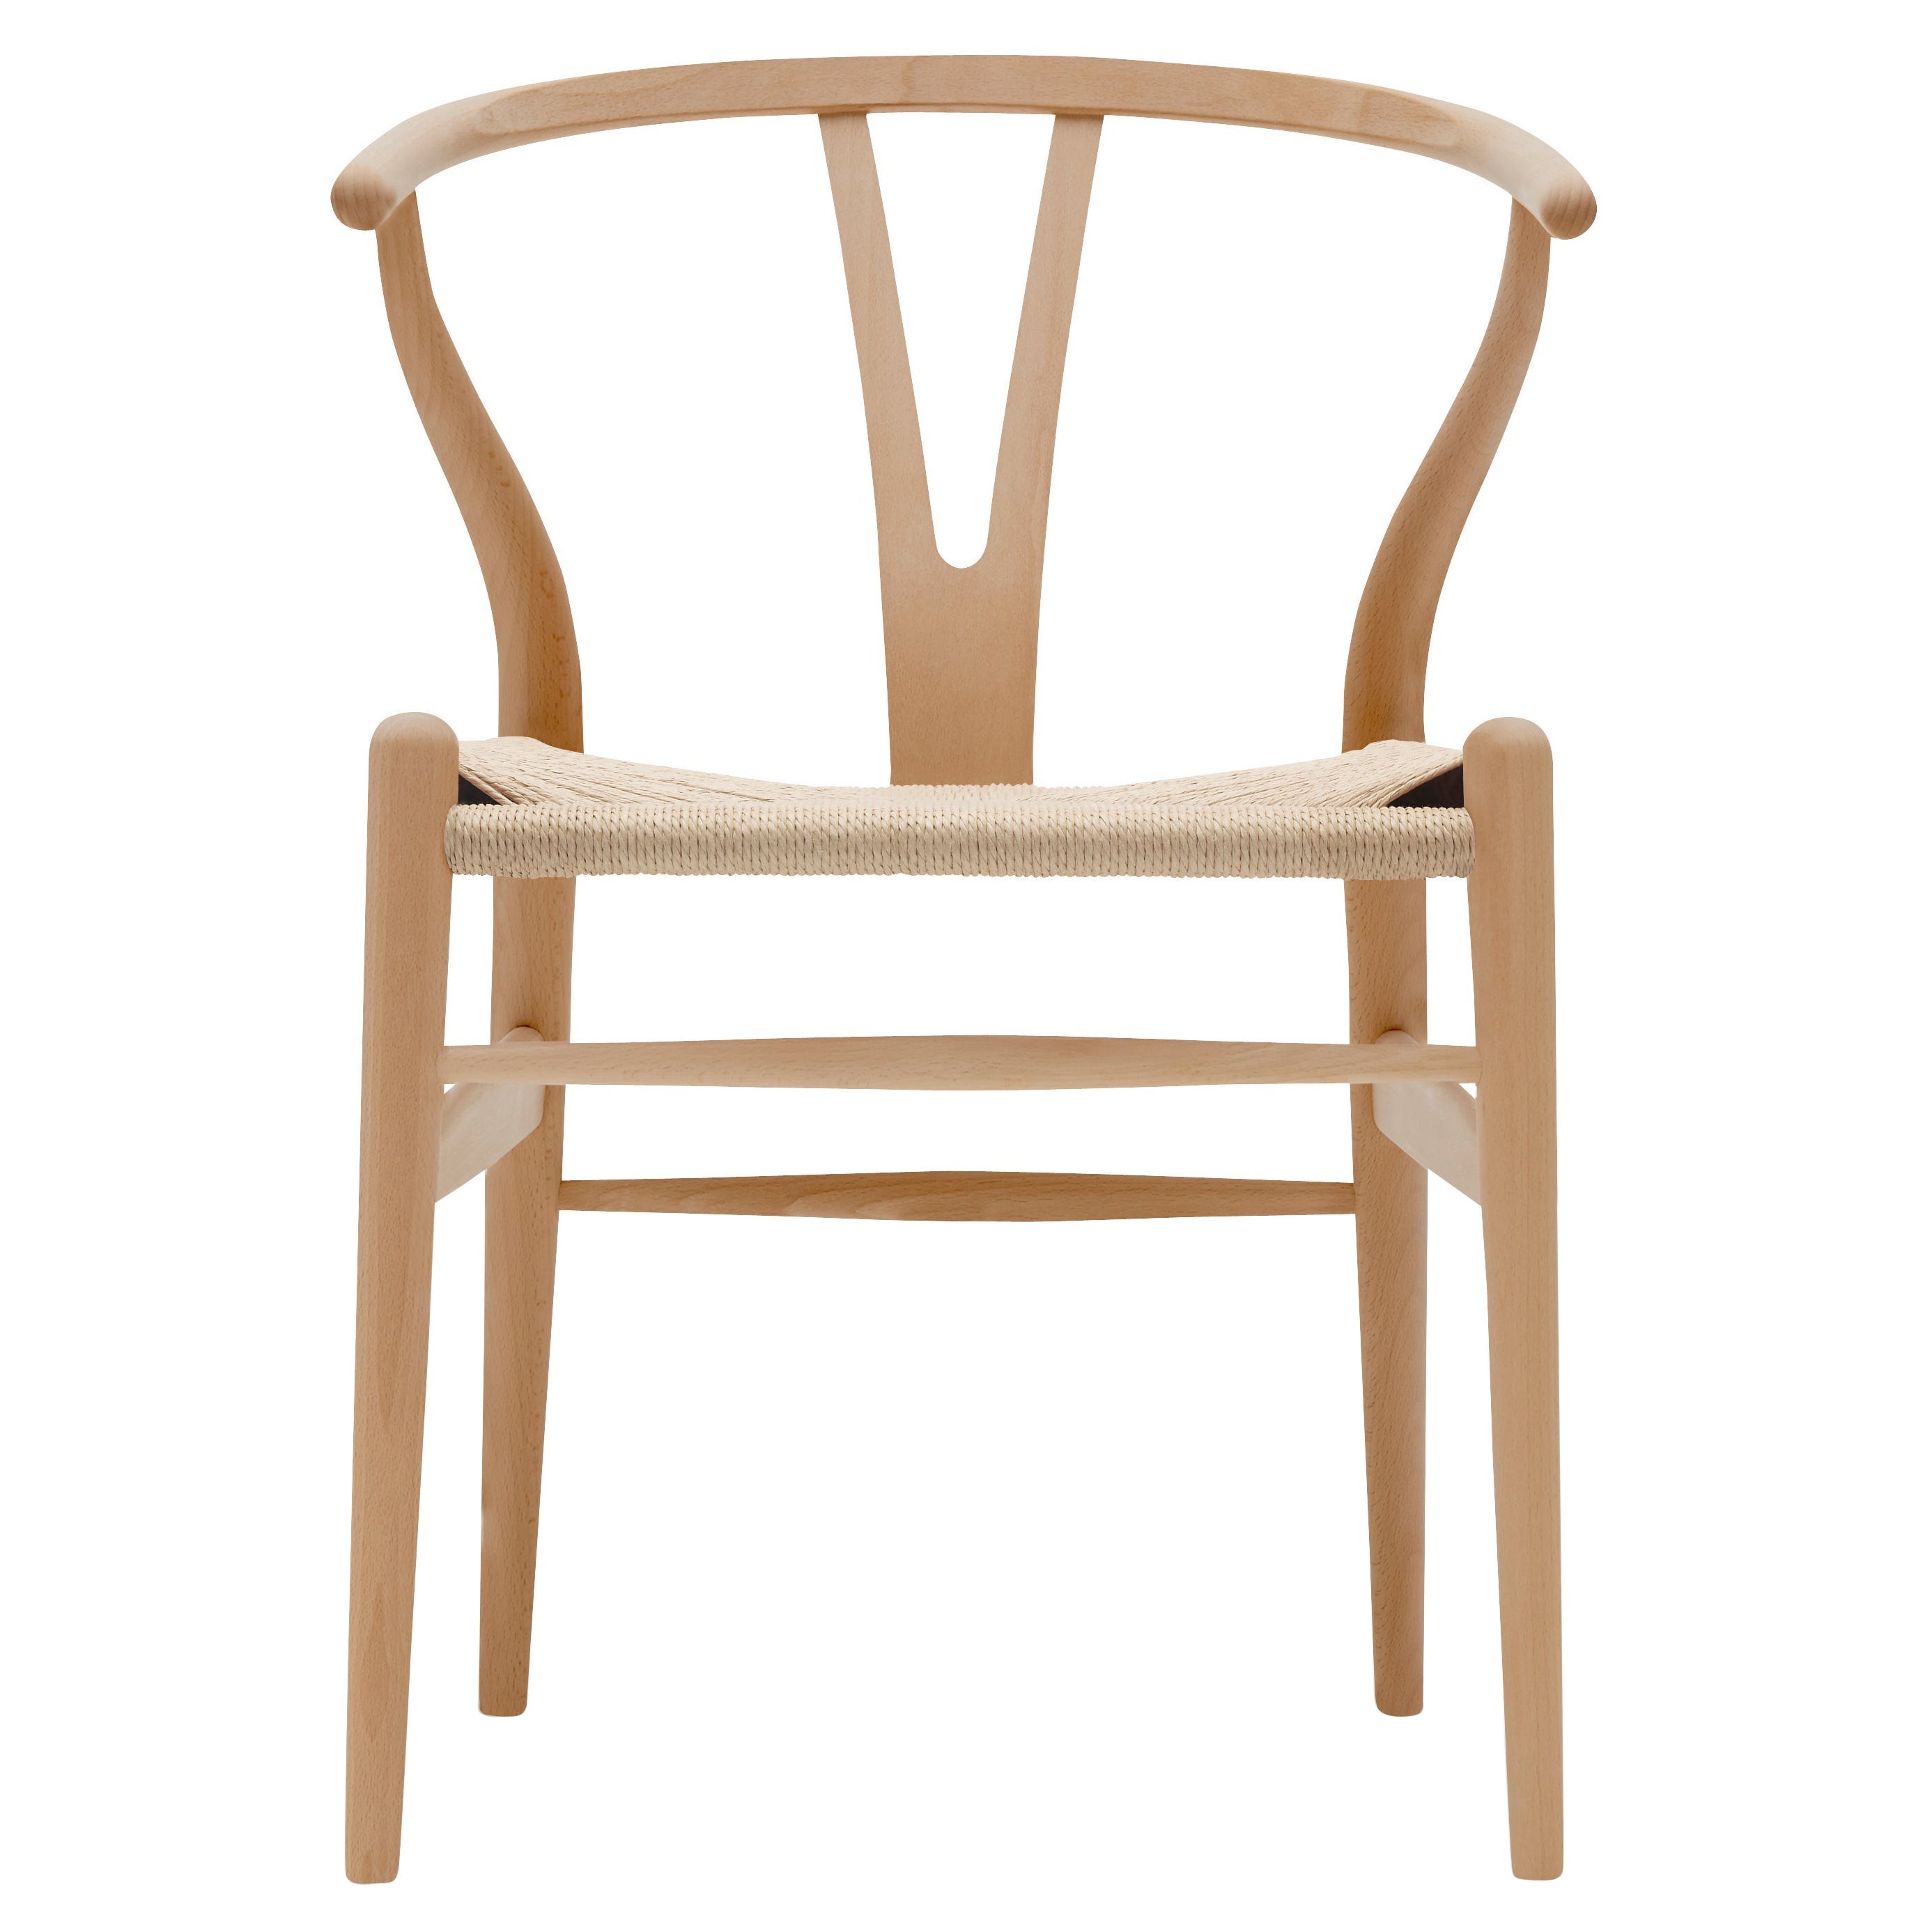 CH24 Wishbone Chair in Beech Lacquer with Natural Papercord Seat by Hans Wegner